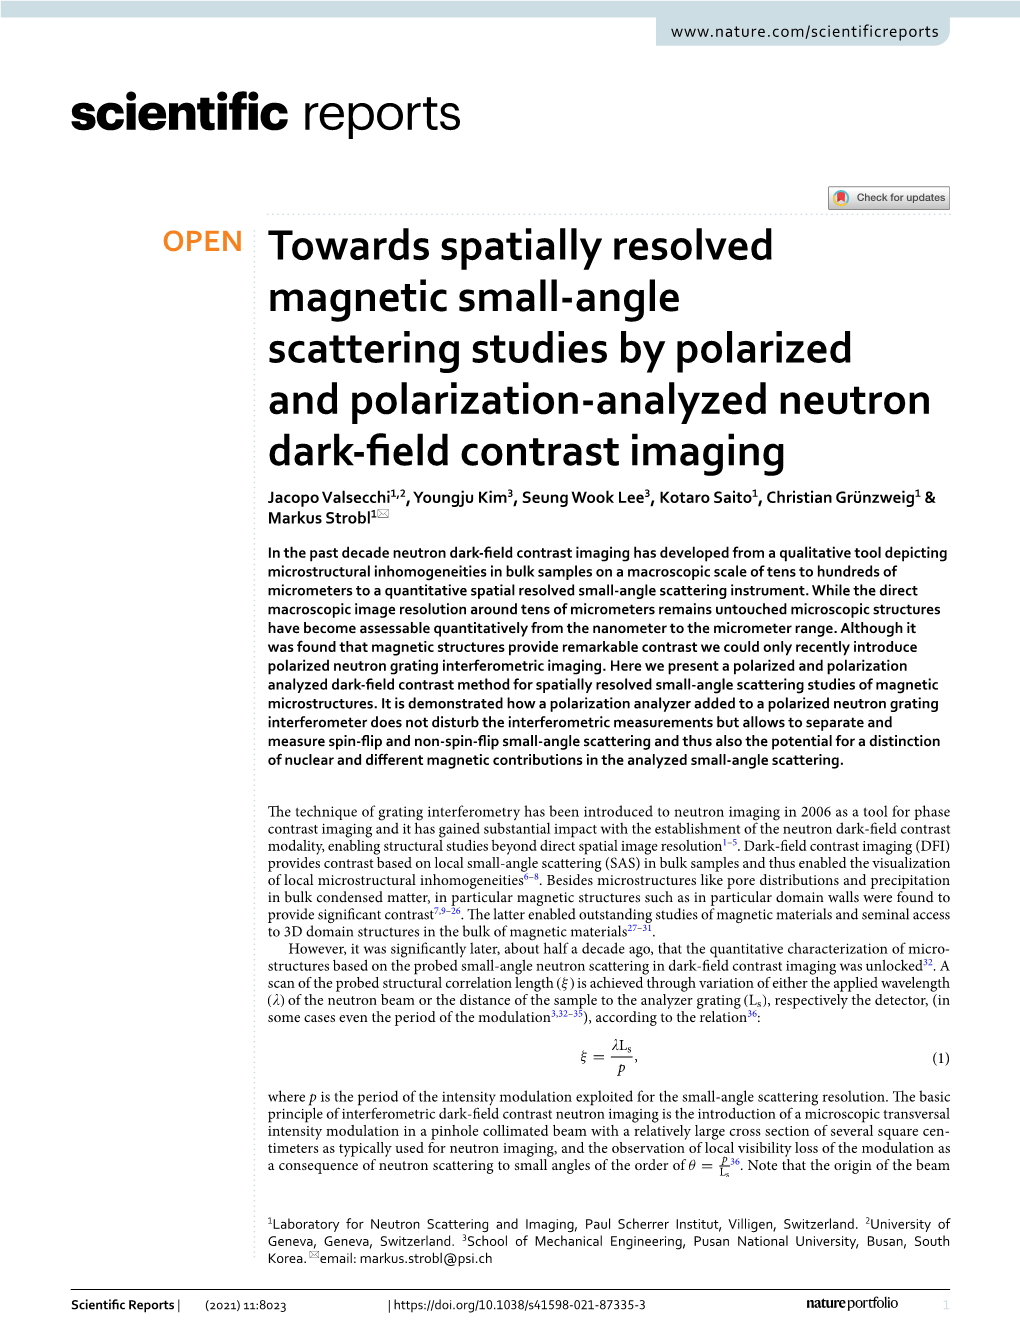 Towards Spatially Resolved Magnetic Small-Angle Scattering Studies By